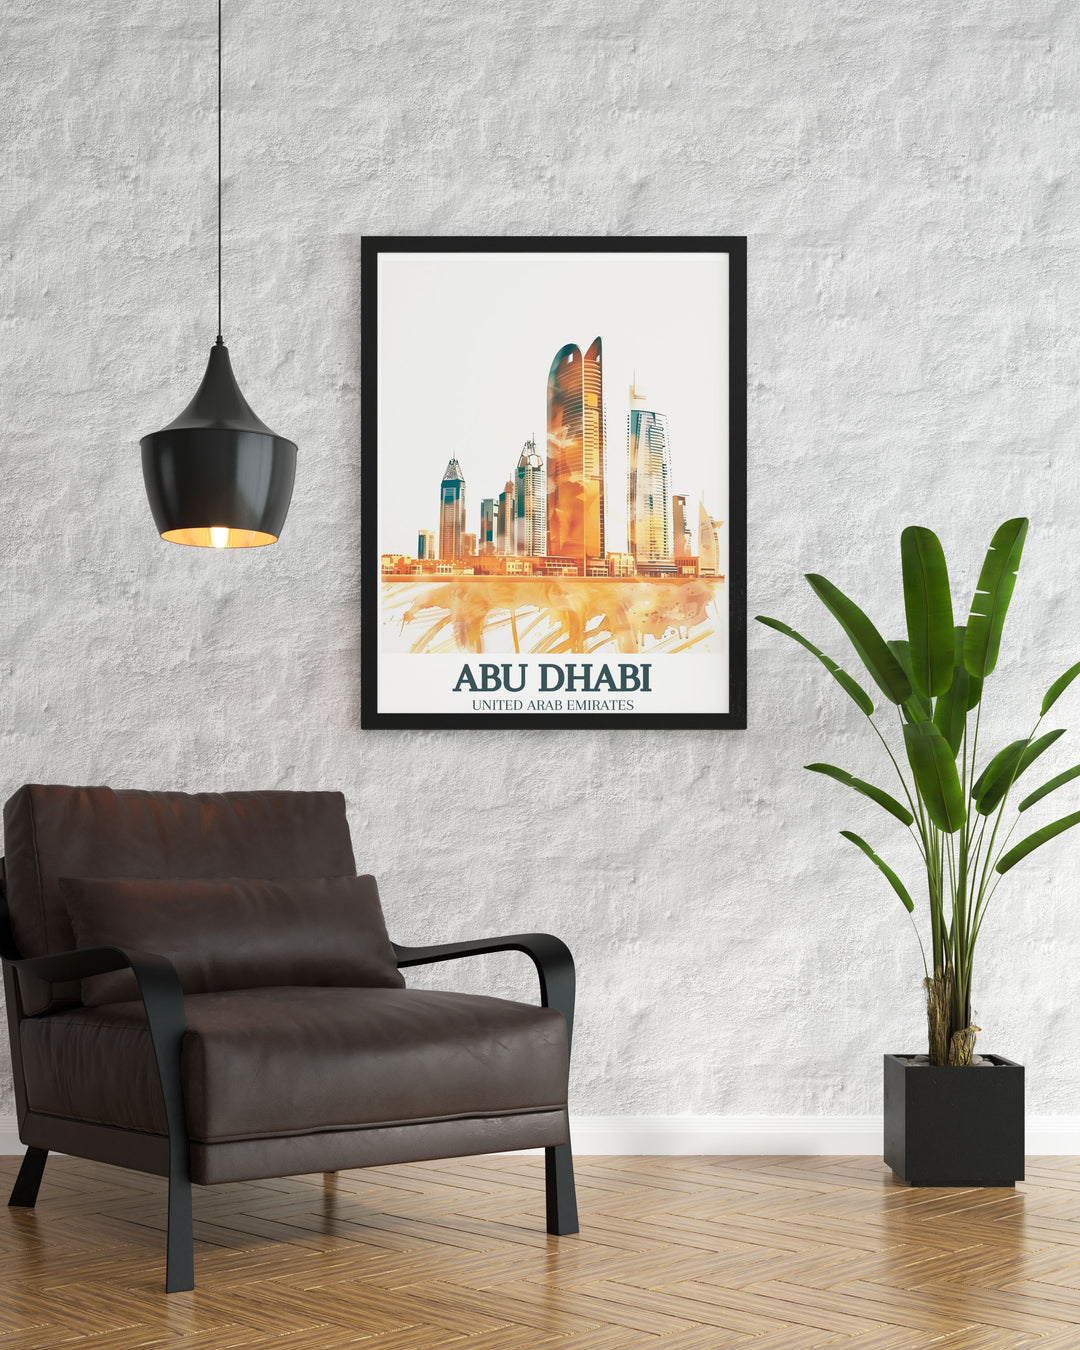 Elegant artwork of the Burj Mohammed Bin Rashid in Abu Dhabi. This travel poster highlights the towers impressive design and makes a striking statement in any room. A perfect piece for collectors of Emirates art and architecture enthusiasts.